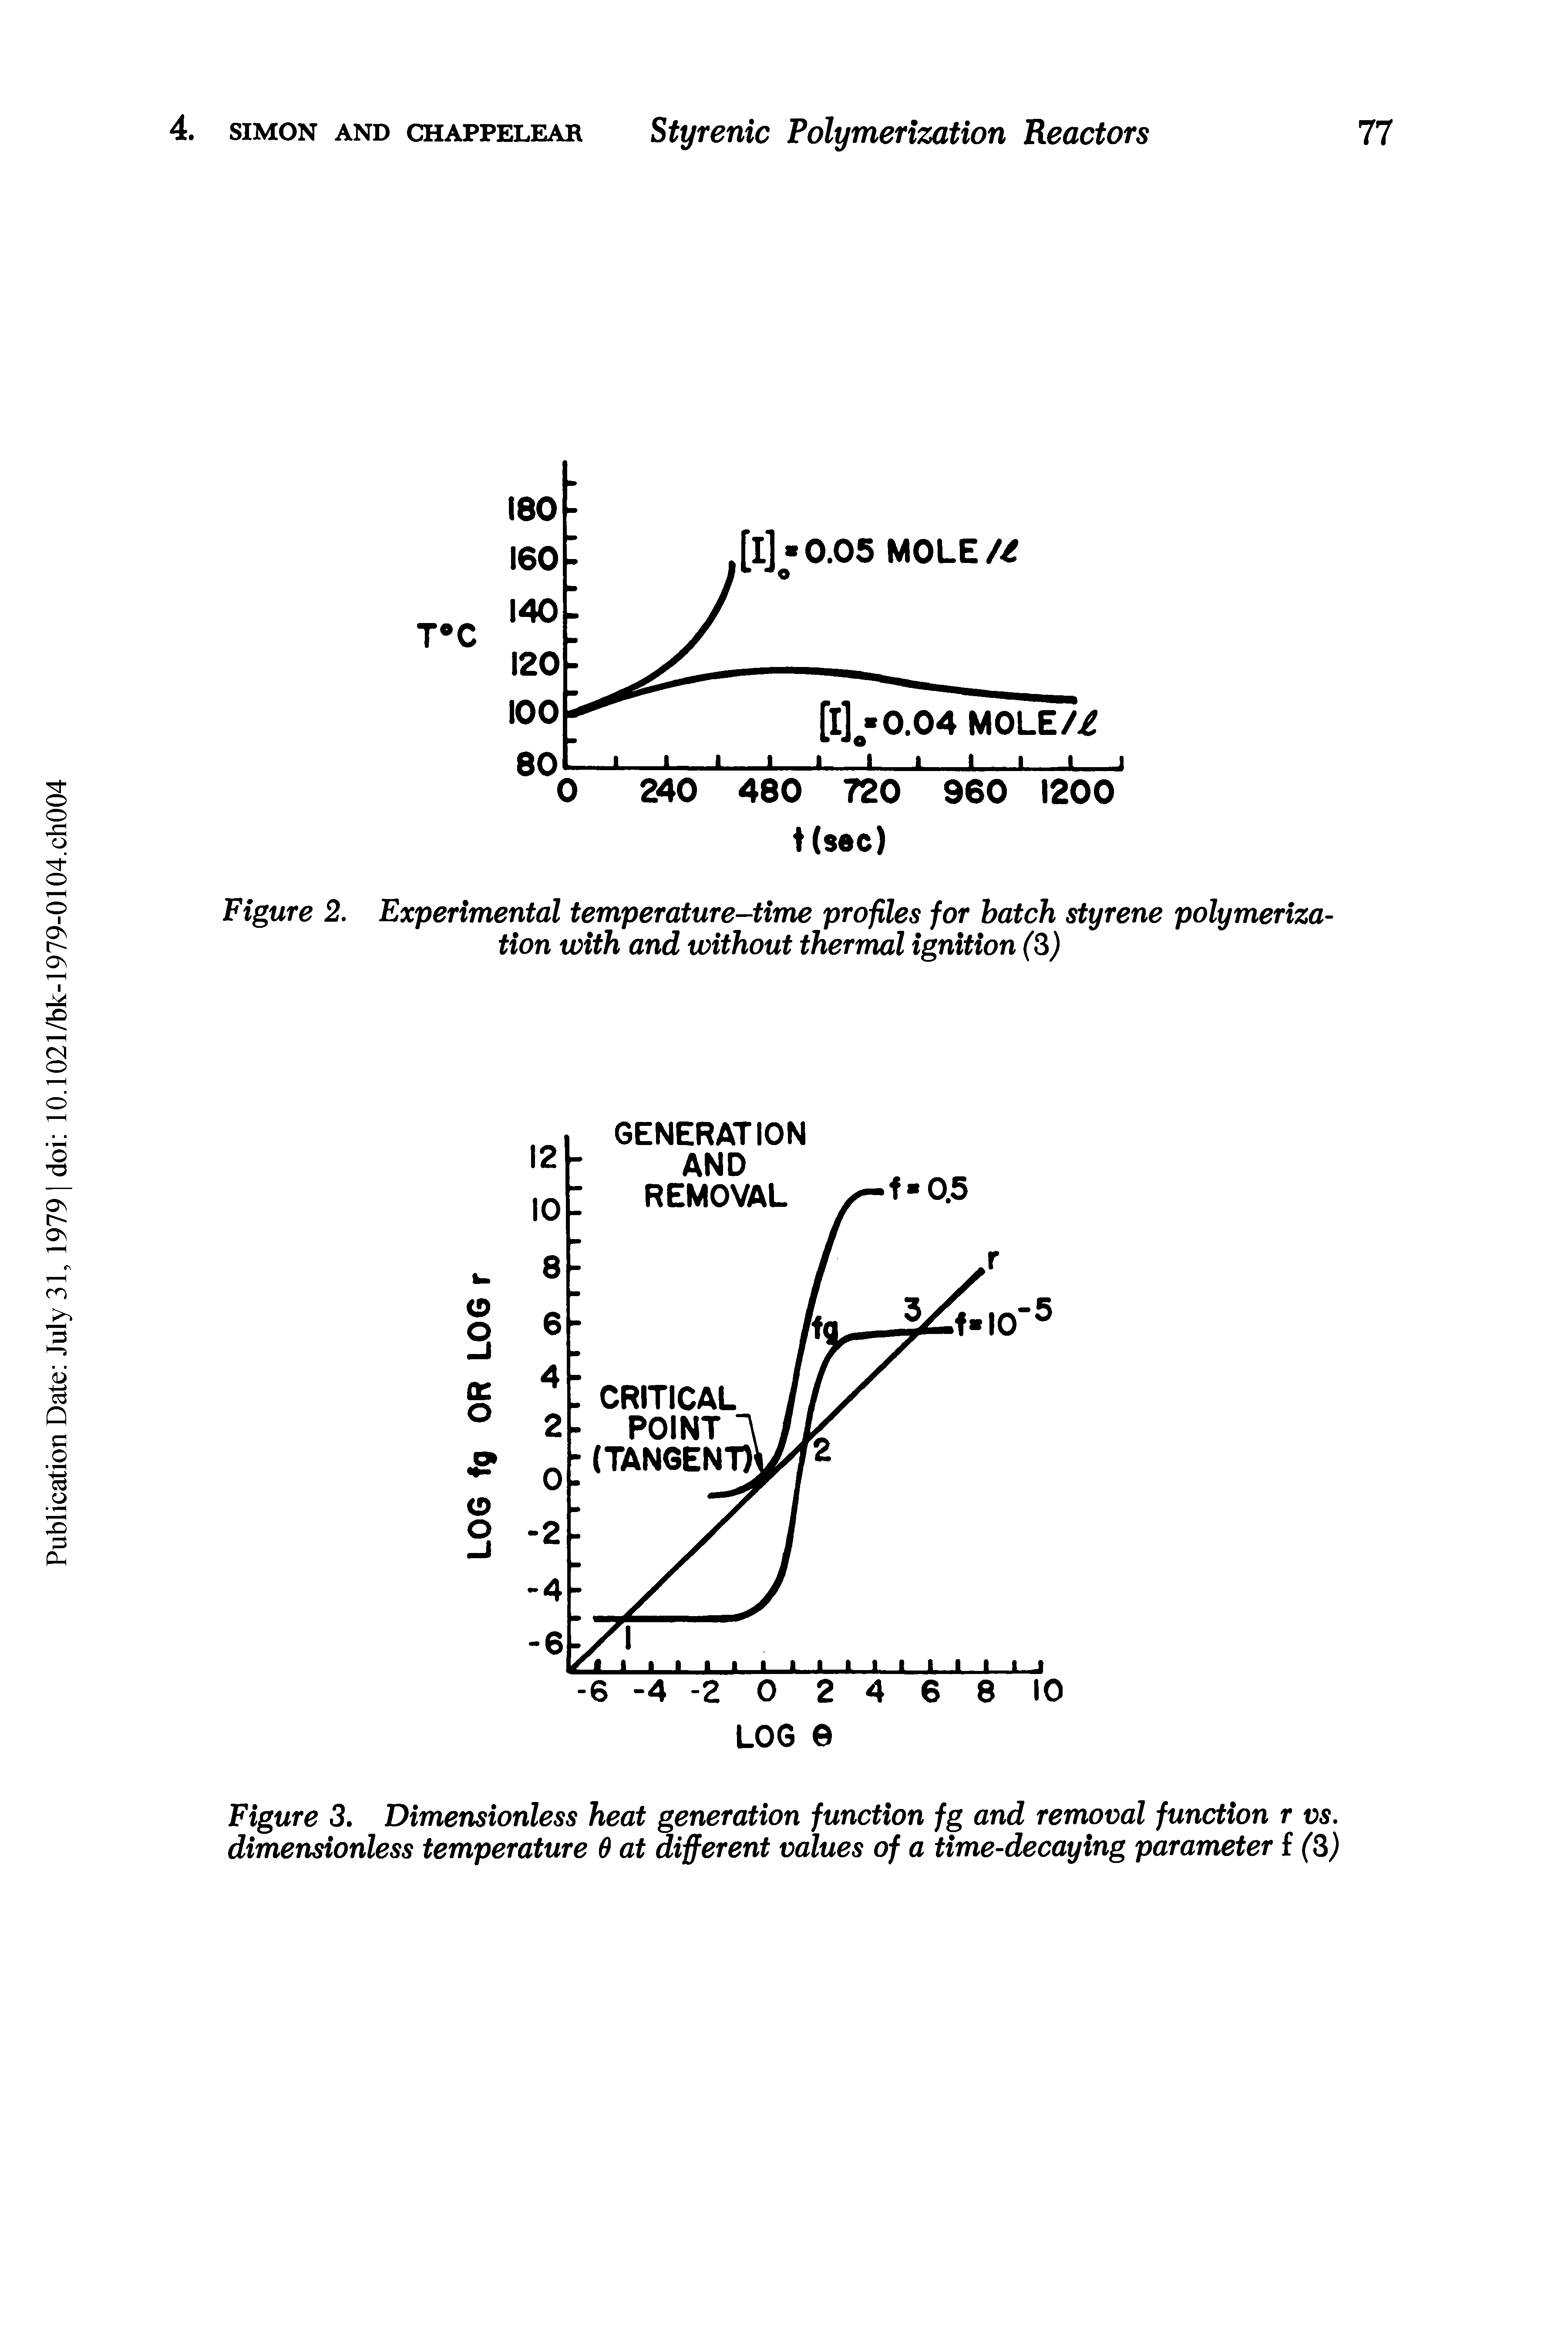 Figure 2. Experimental temperature-time profiles for batch styrene polymerization with and without thermal ignition (S)...